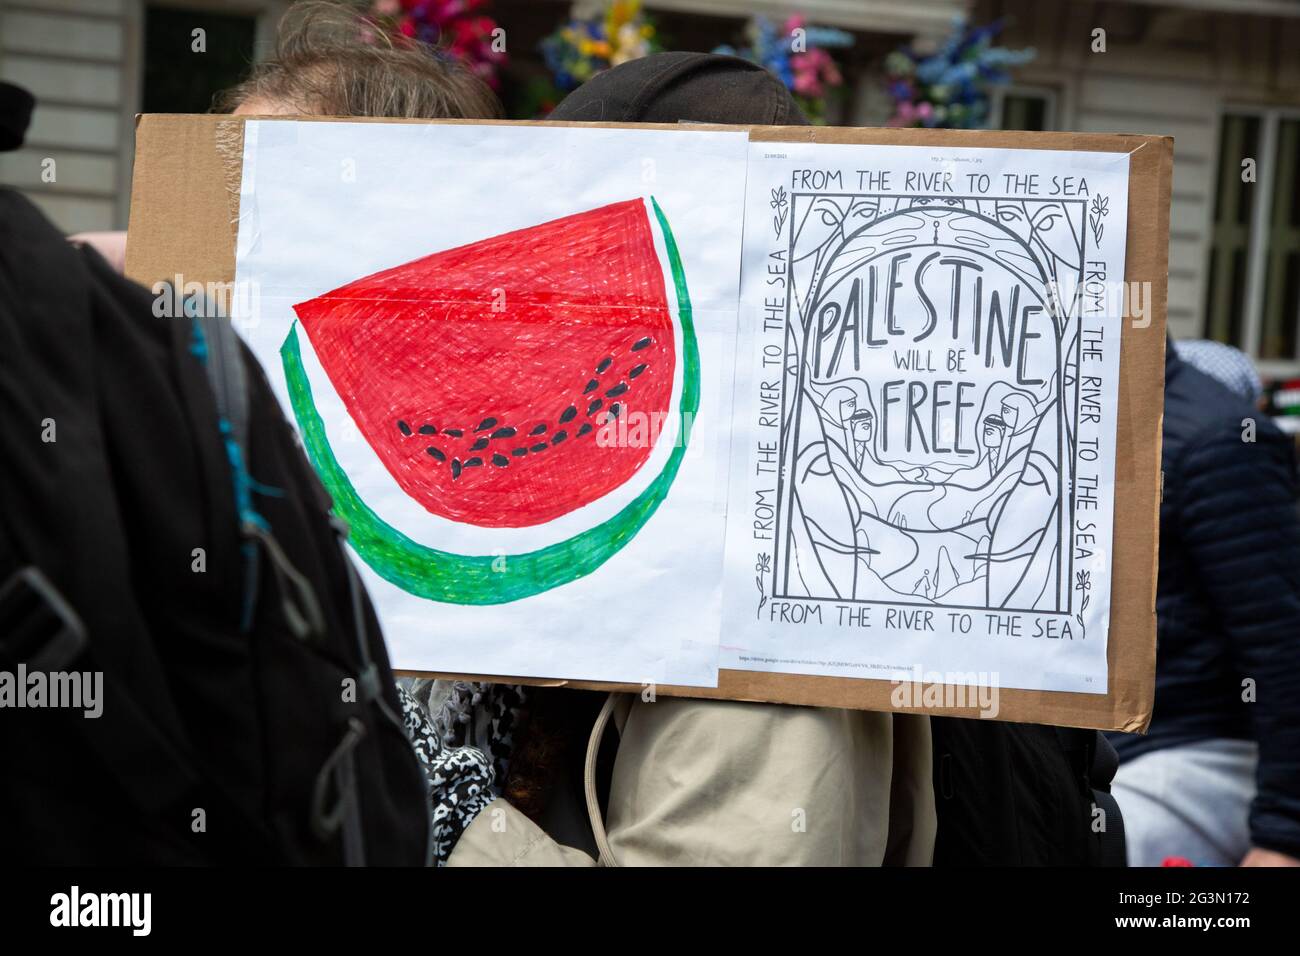 A protester carrying a watermelon sign as a symbol for Palestine at the Free Palestine Protest, London, 22.5.2021 Stock Photo